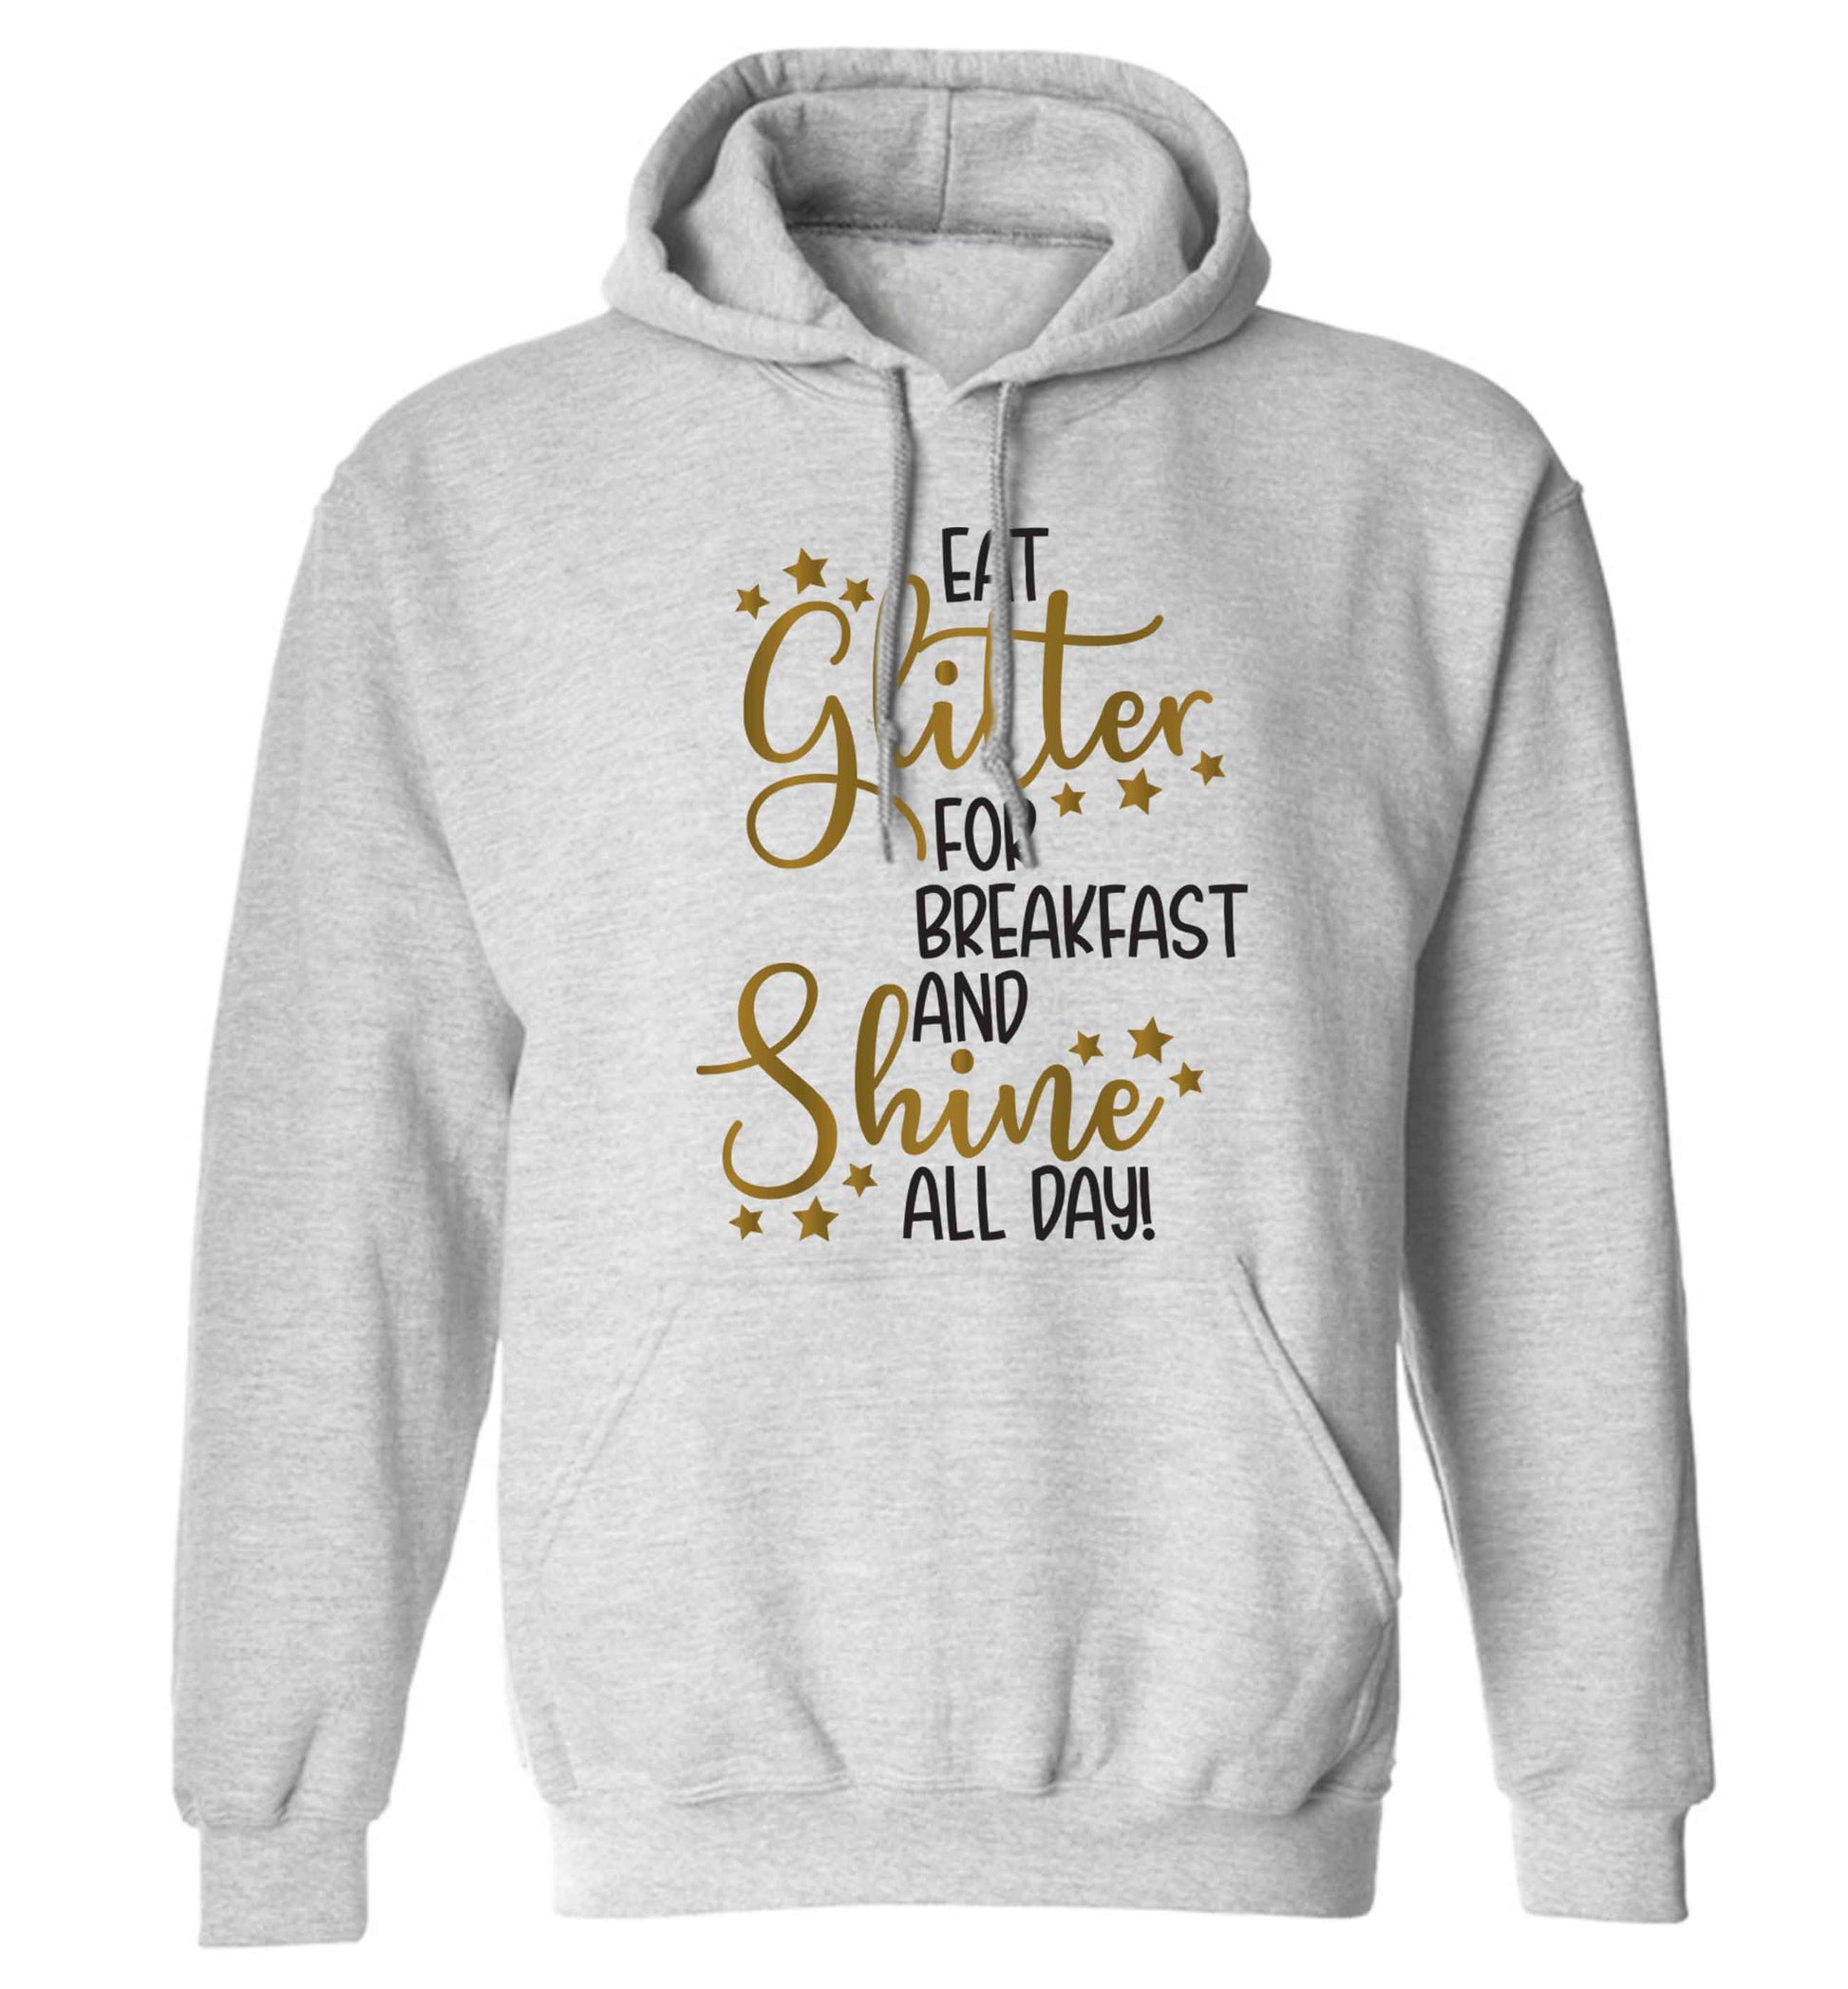 Eat glitter for breakfast and shine all day adults unisex grey hoodie 2XL